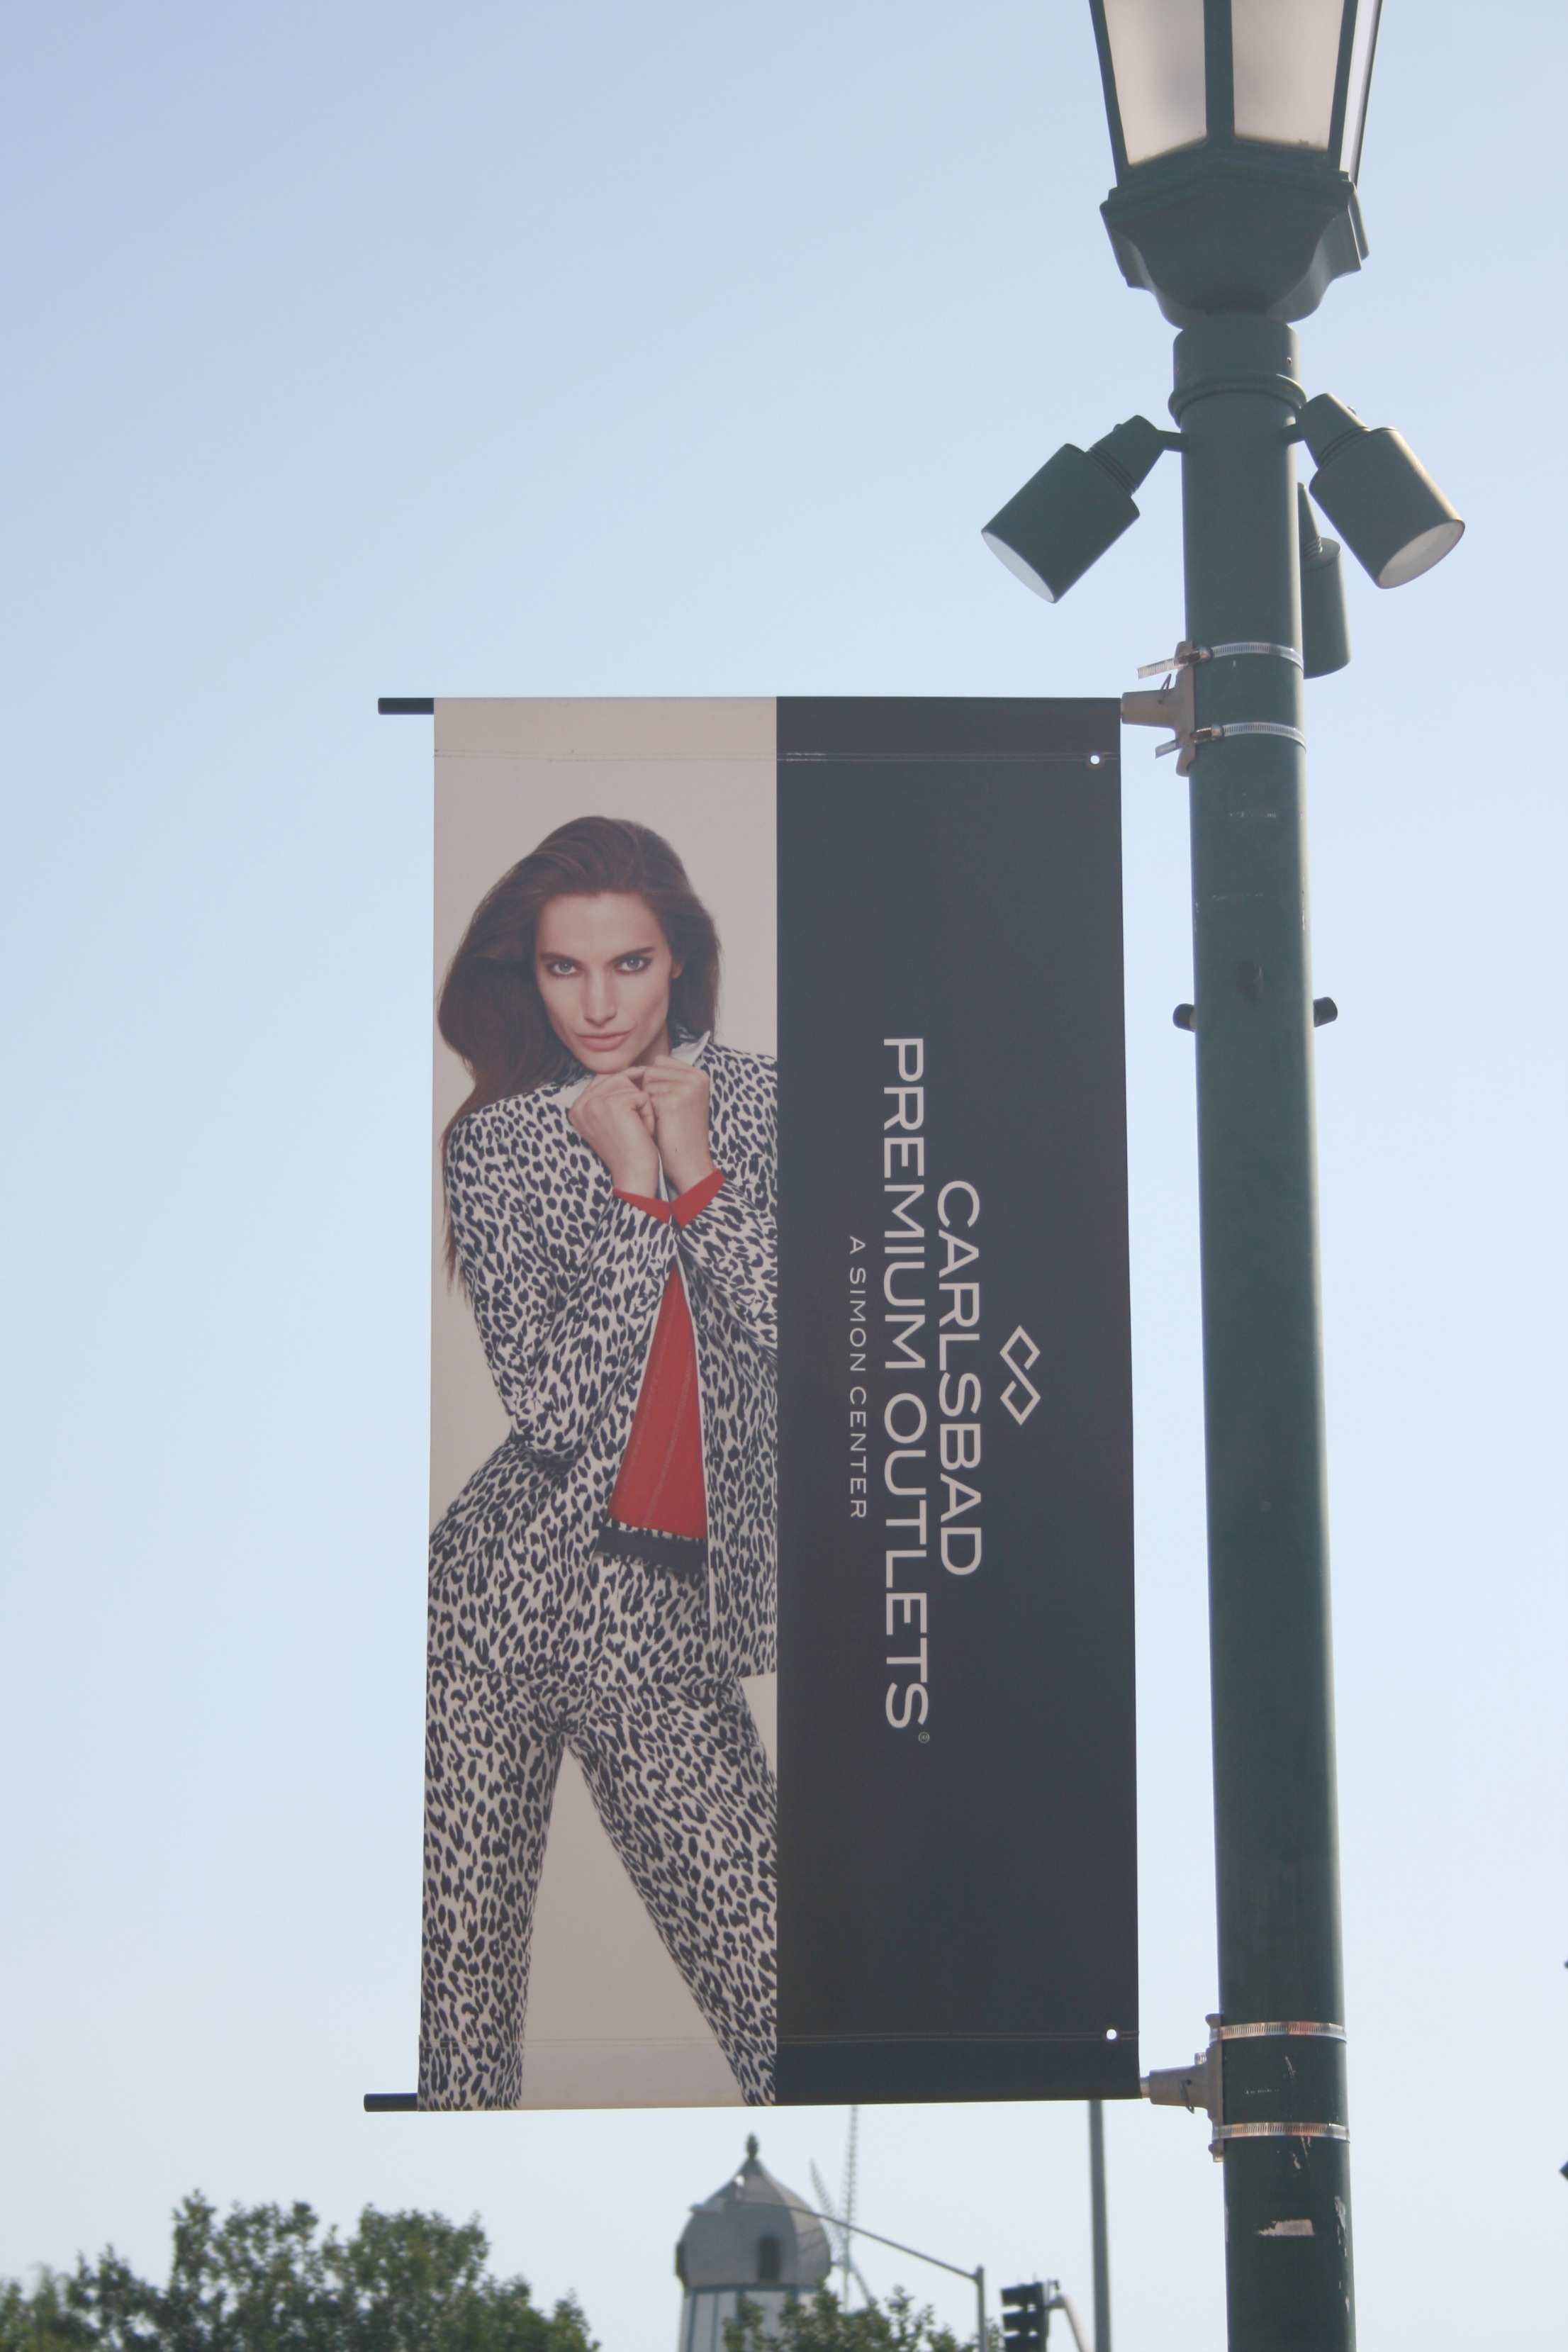 Welcome To Carlsbad Premium Outlets® - A Shopping Center In Carlsbad, CA -  A Simon Property